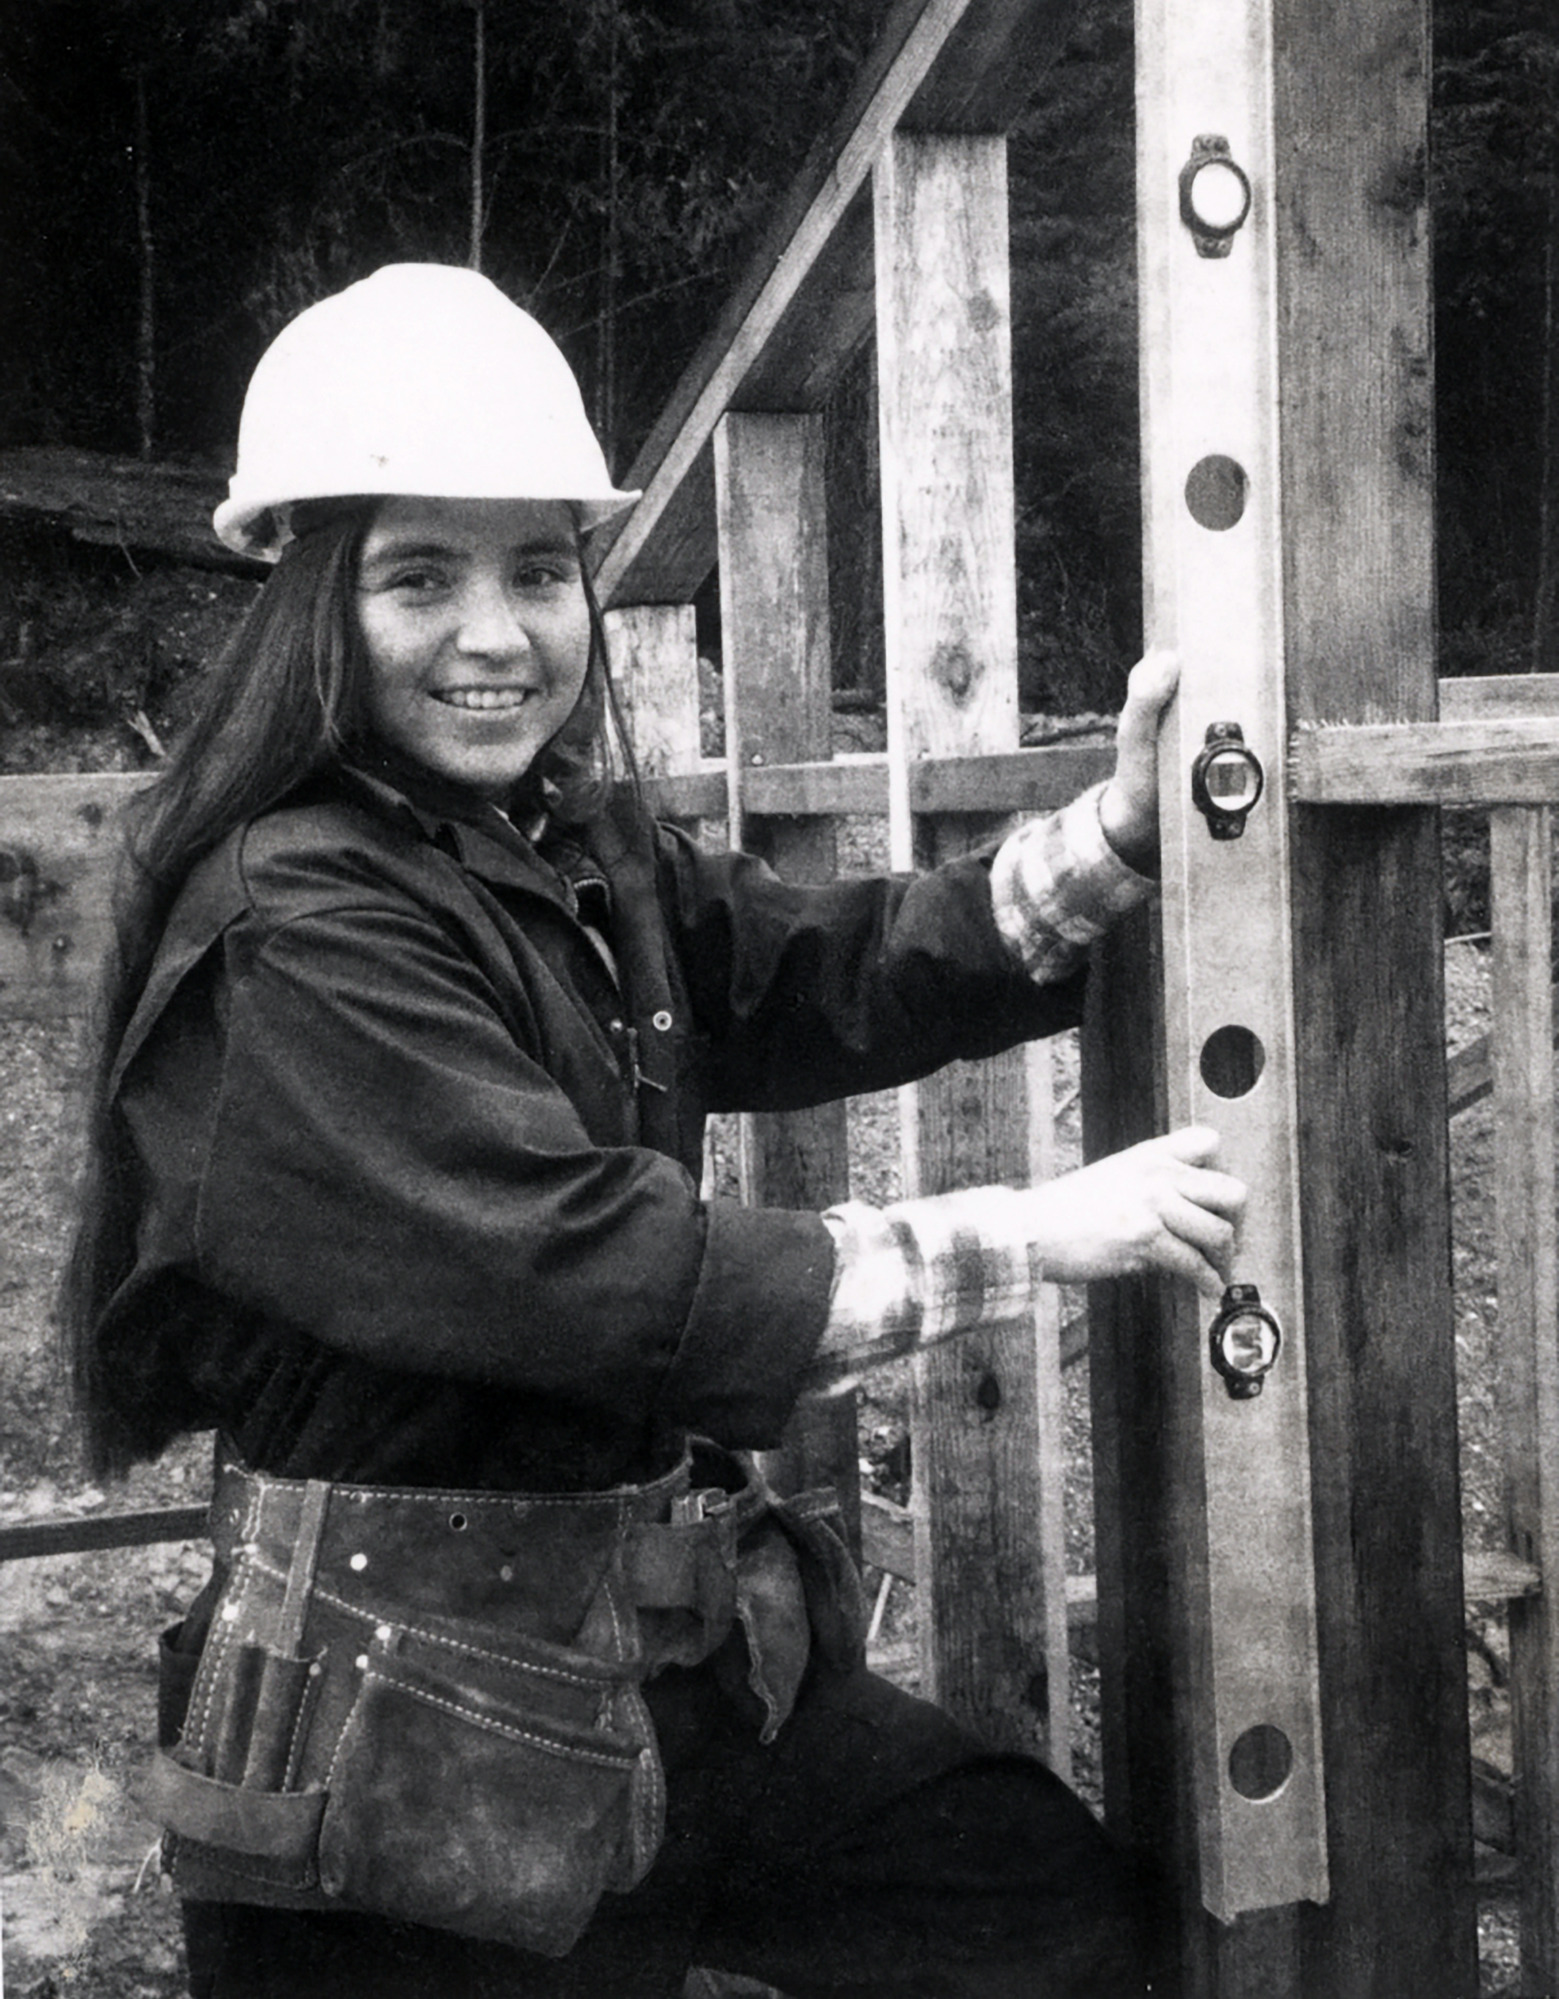 Toni Whipple wears a hard hat and tool belt as she holds a level up to a timber framing.